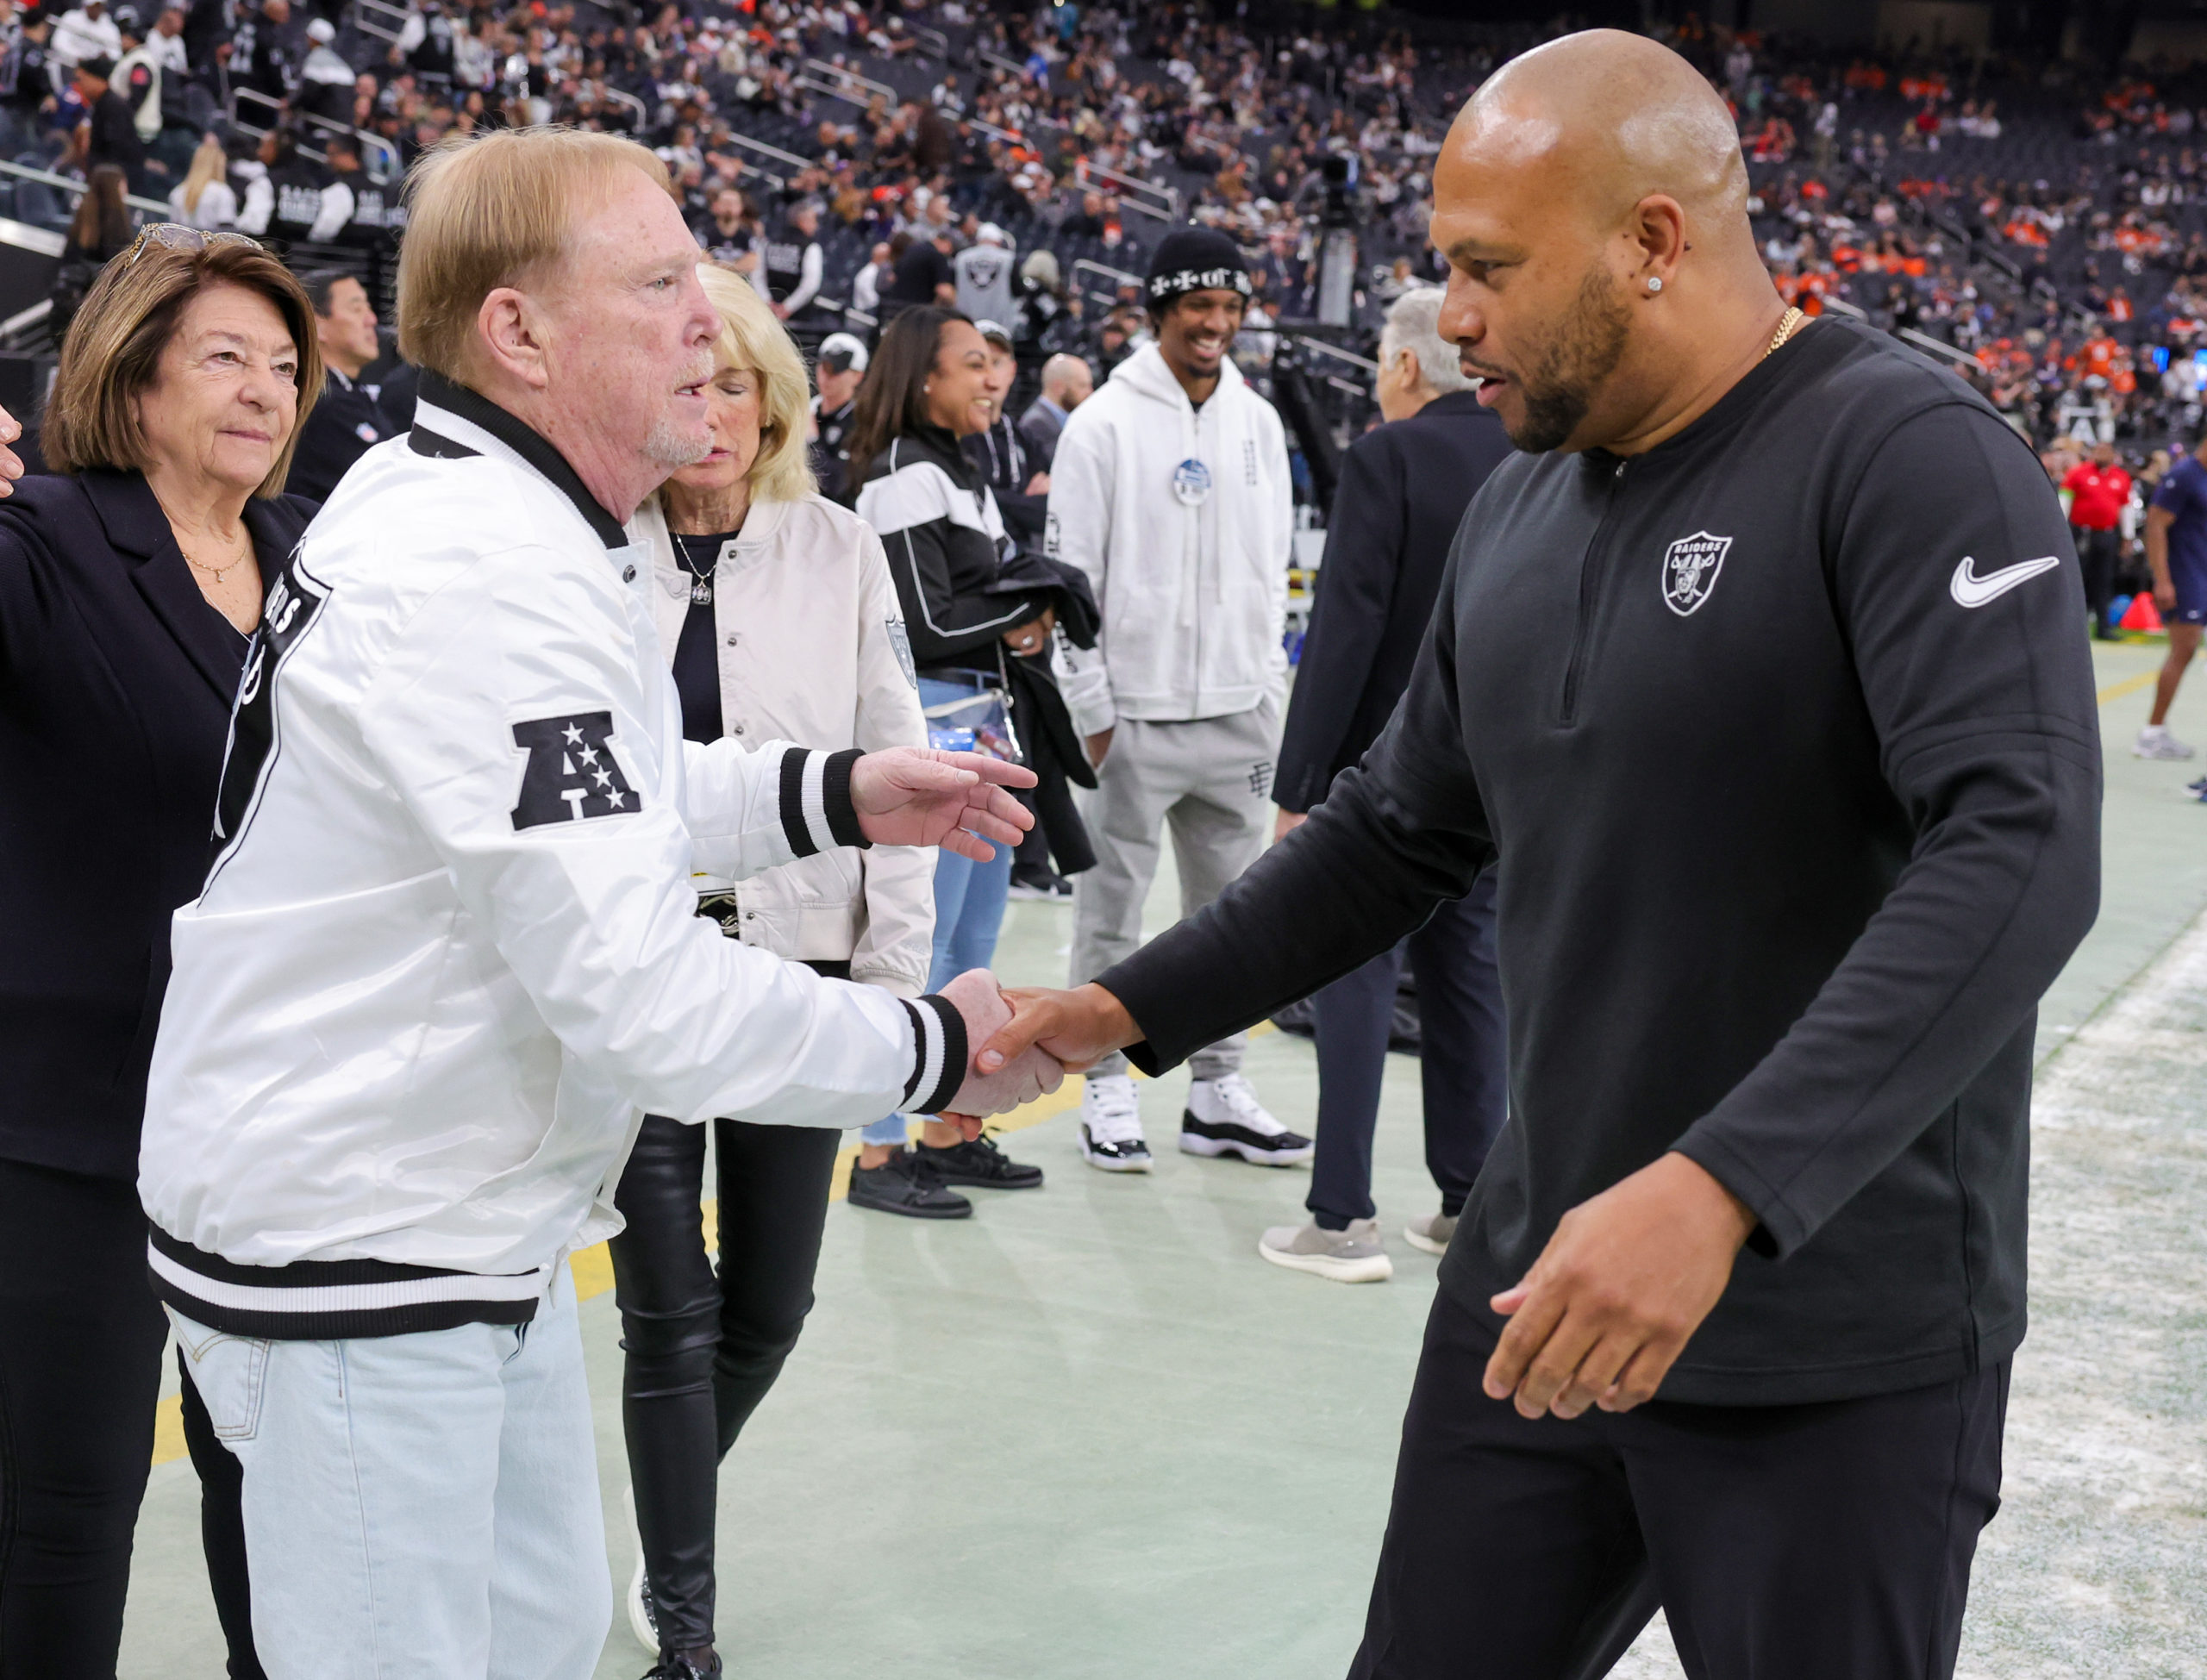 LAS VEGAS, NEVADA - JANUARY 07: Owner and managing general partner Mark Davis (L) and interim head coach Antonio Pierce of the Las Vegas Raiders greet each other on the Raiders' sideline before the team's game against the Denver Broncos at Allegiant Stadium on January 07, 2024 in Las Vegas, Nevada. The Raiders defeated the Broncos 27-14. Ethan Miller/Getty Images